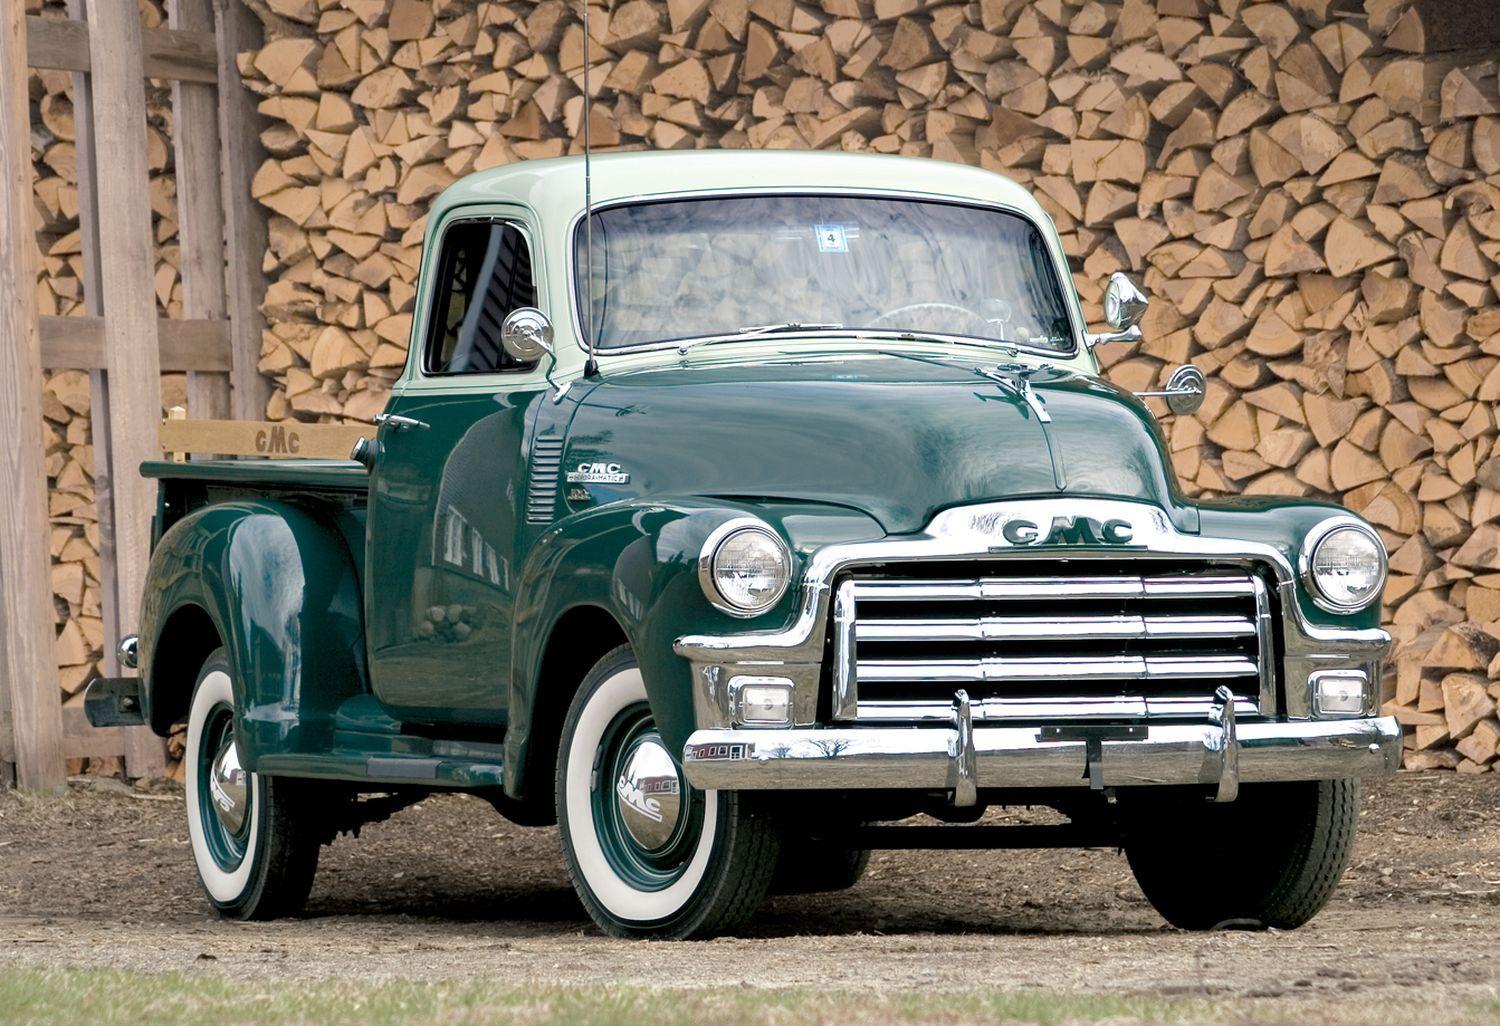 Vintage GMC Truck Logo - Vintage Chevrolet Club opens its doors to GMCs | Hemmings Daily